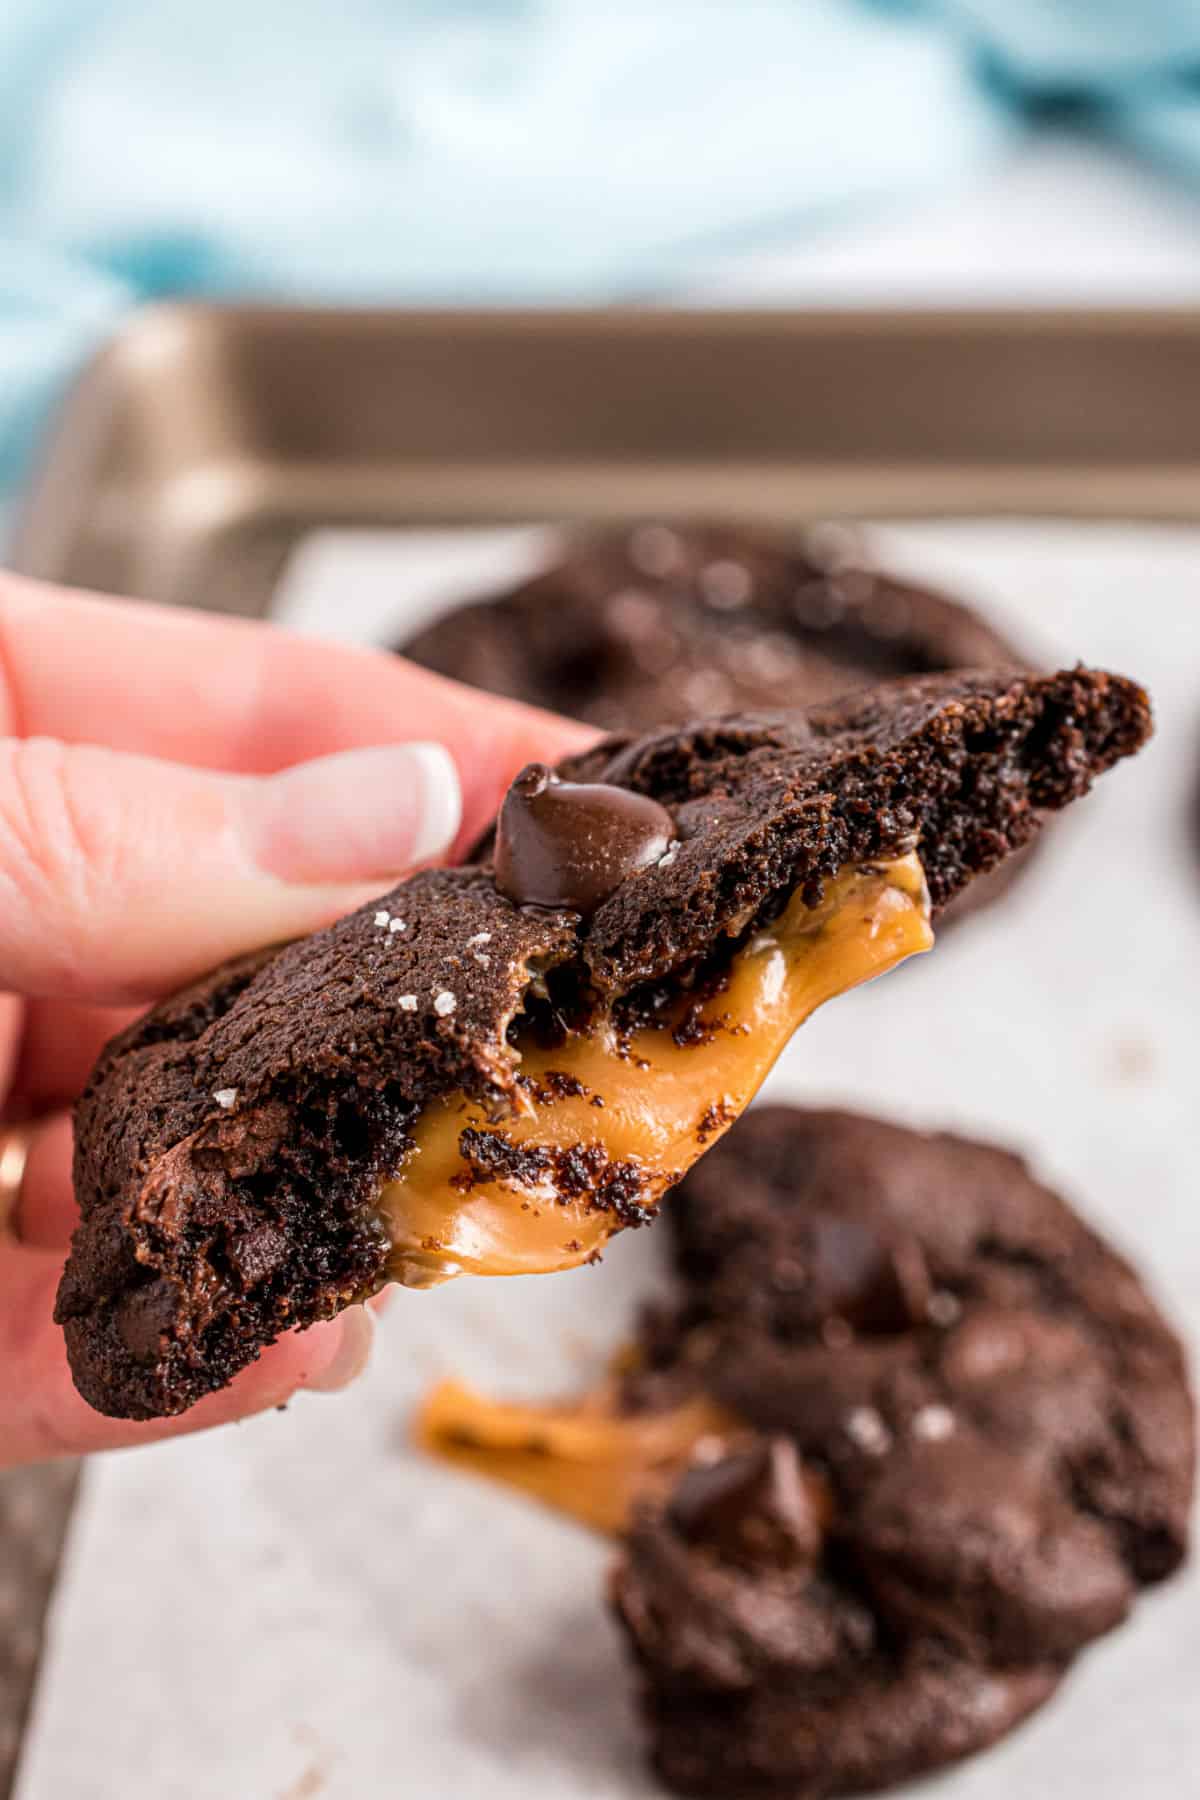 Hand holding a chocolate cookie with caramel oozing out the middle.